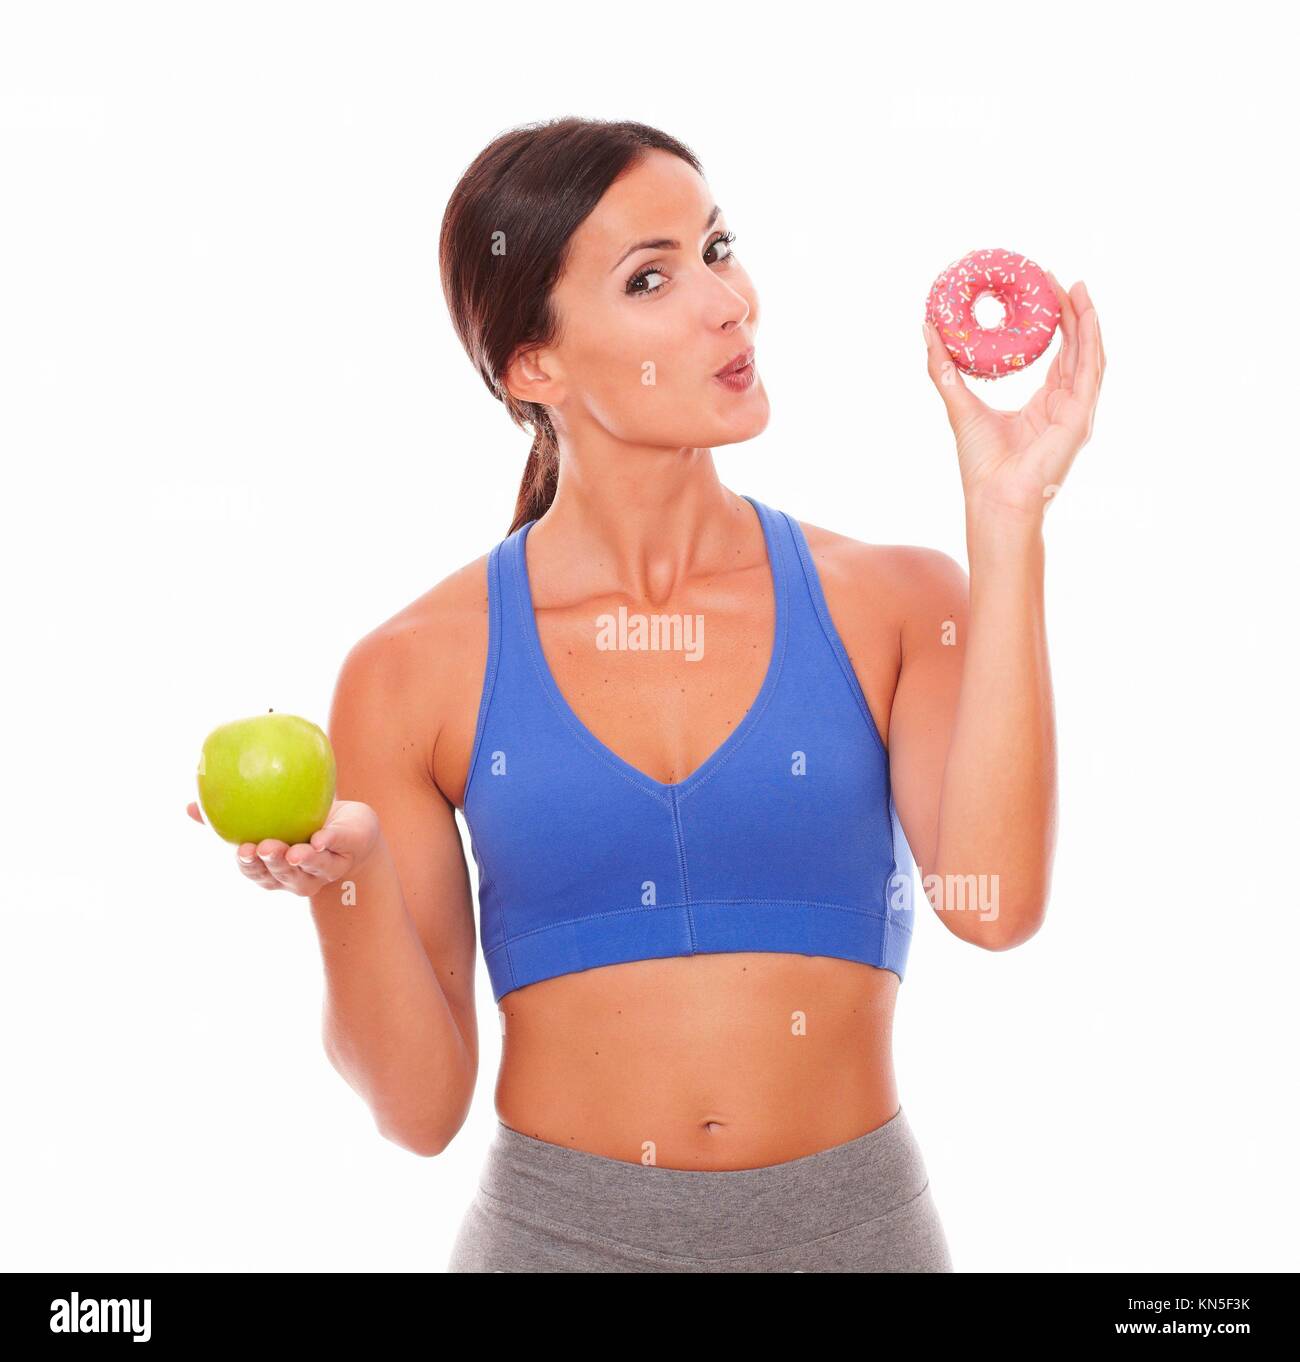 Smiling sporty lady wanting to eat sugary food on isolated background. Stock Photo